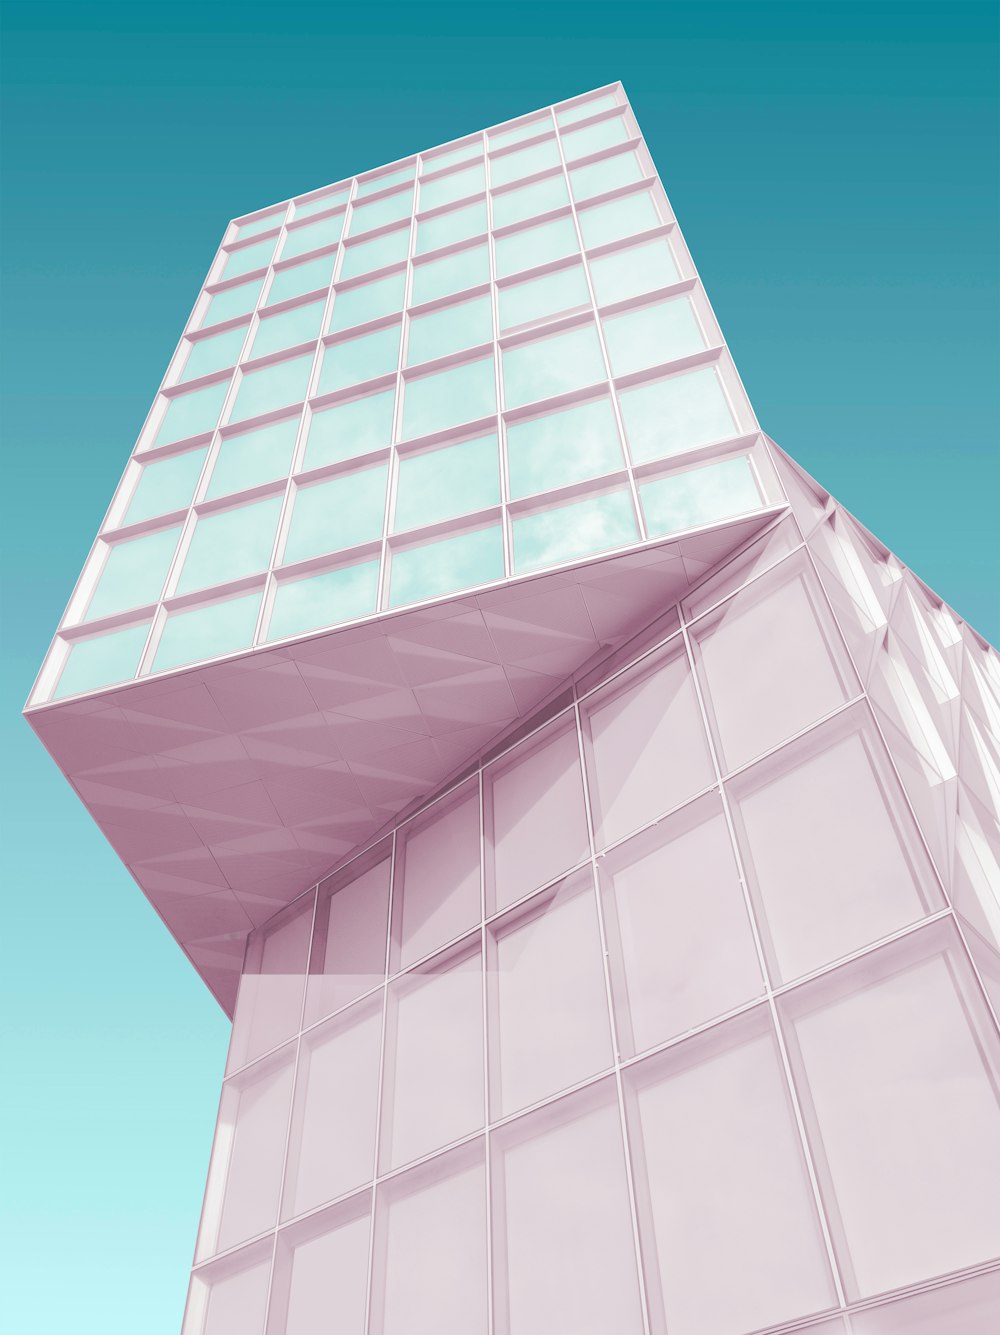 white and pink high rise building